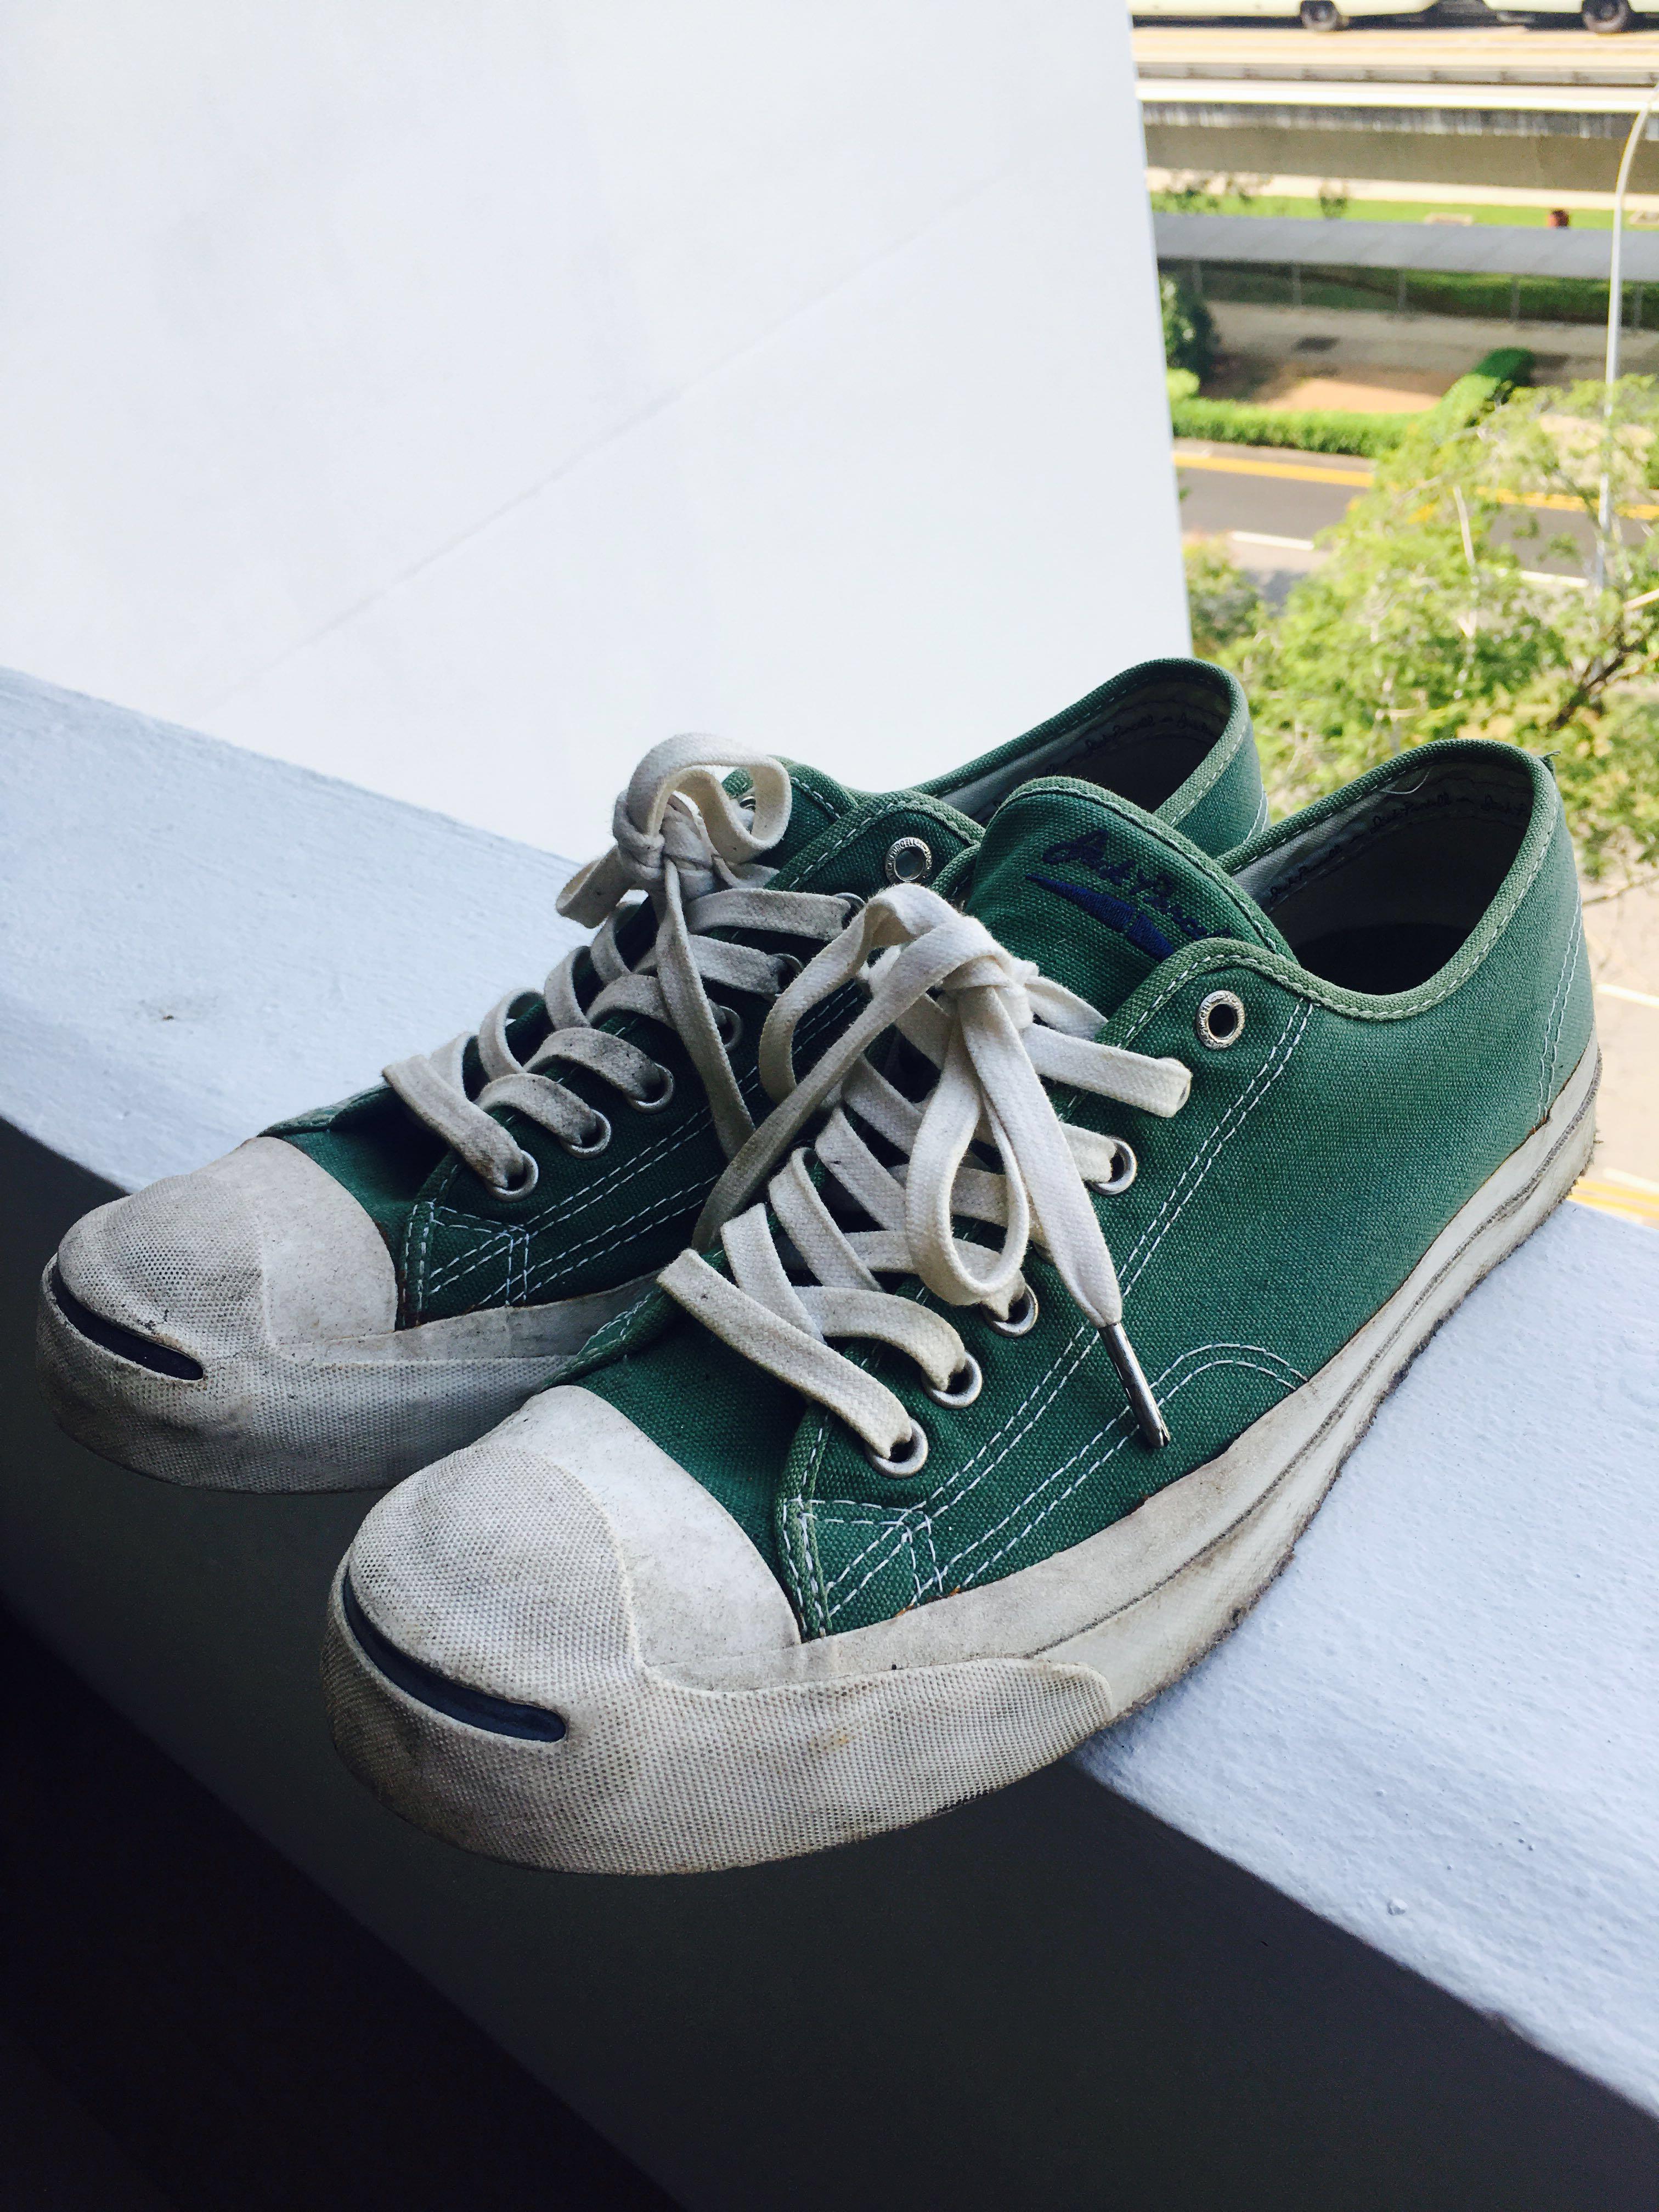 Jack purcell green, Men's Fashion 